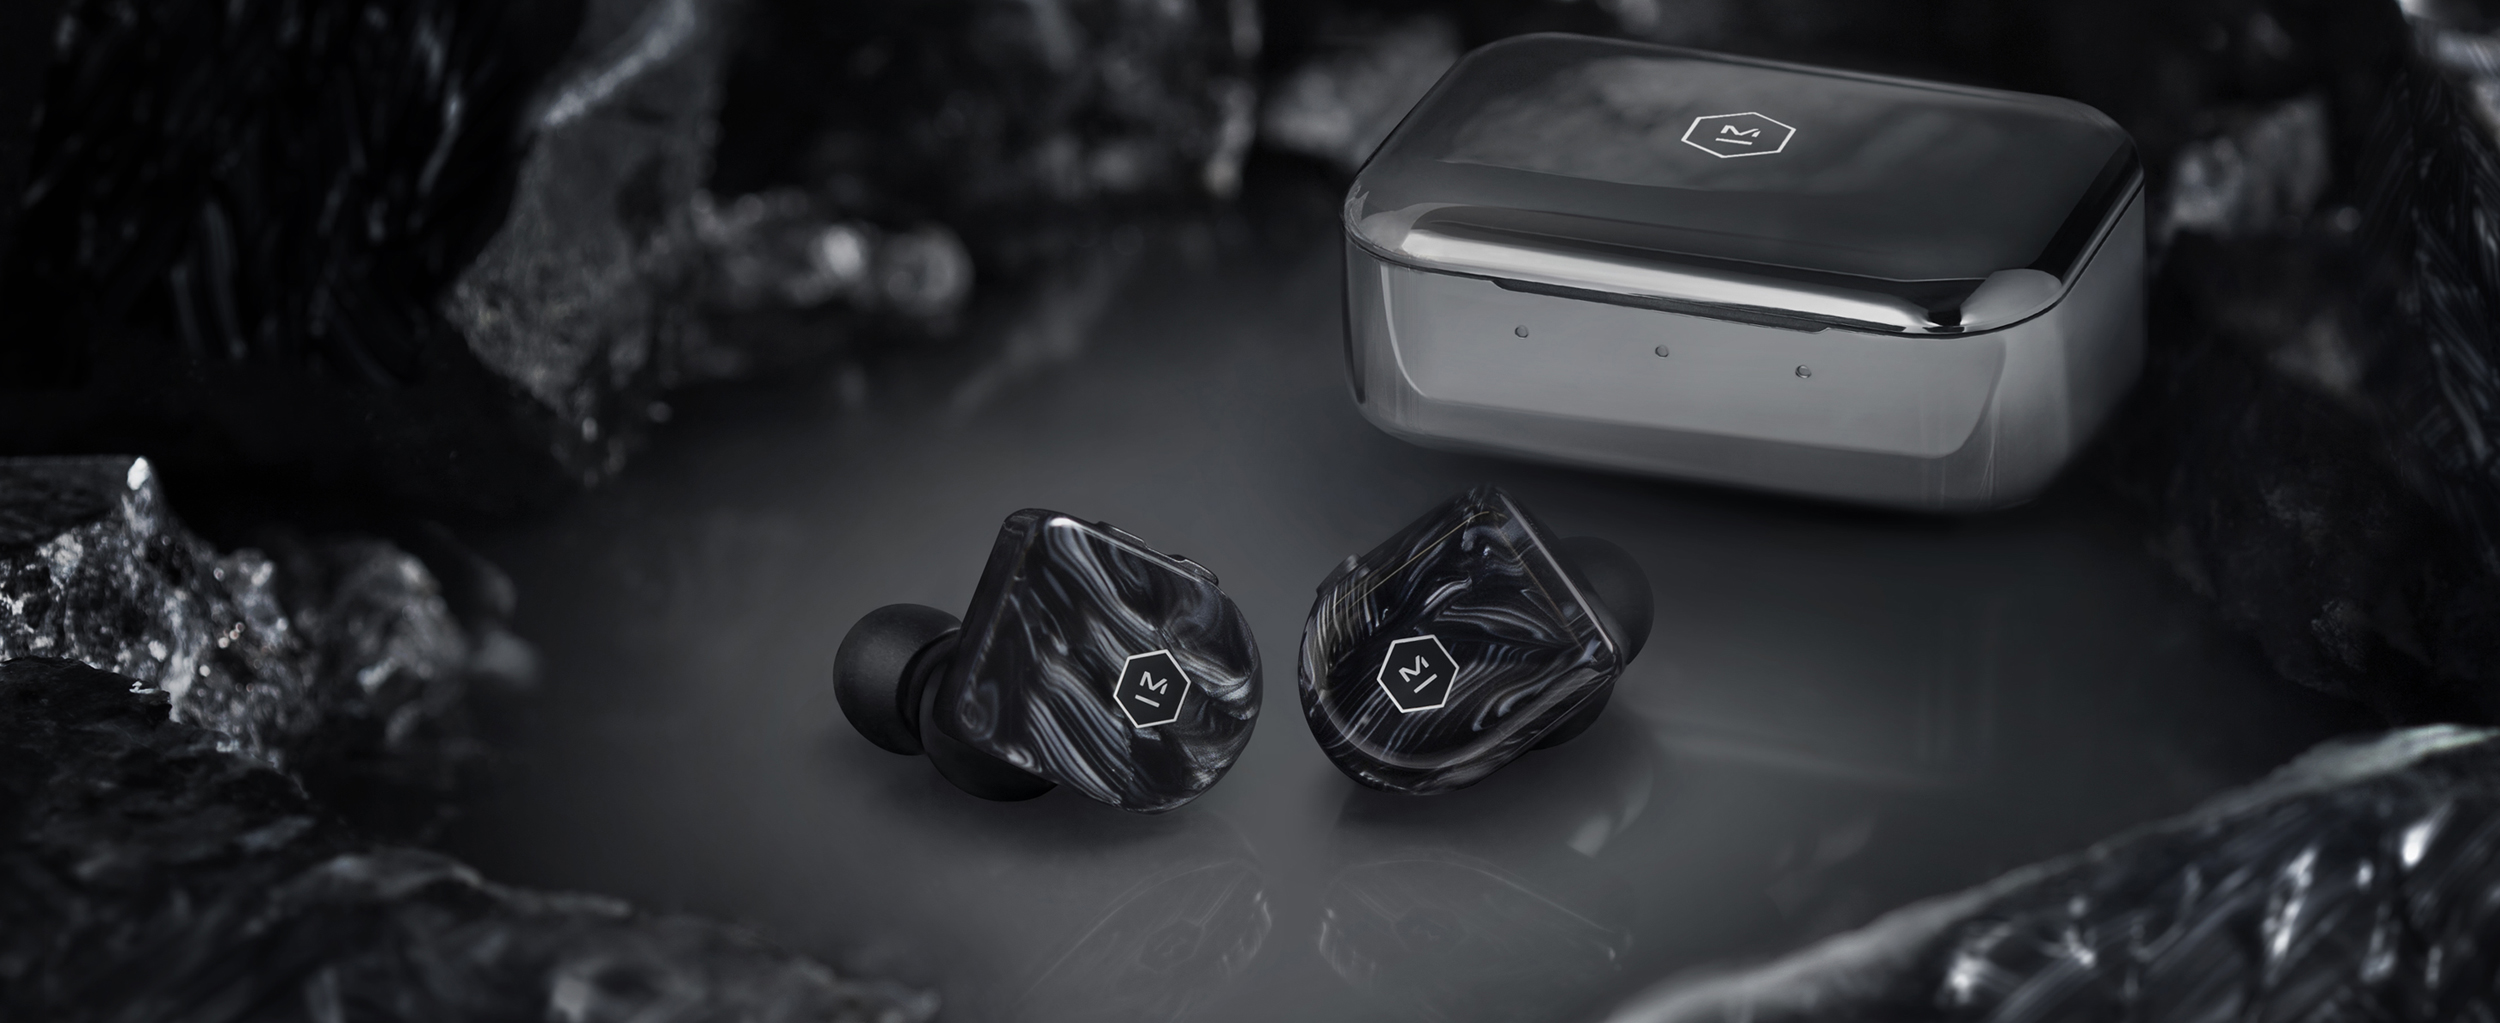 Introducing The MW07 PLUS True Wireless Earphones: Our Best Sounding Earbuds